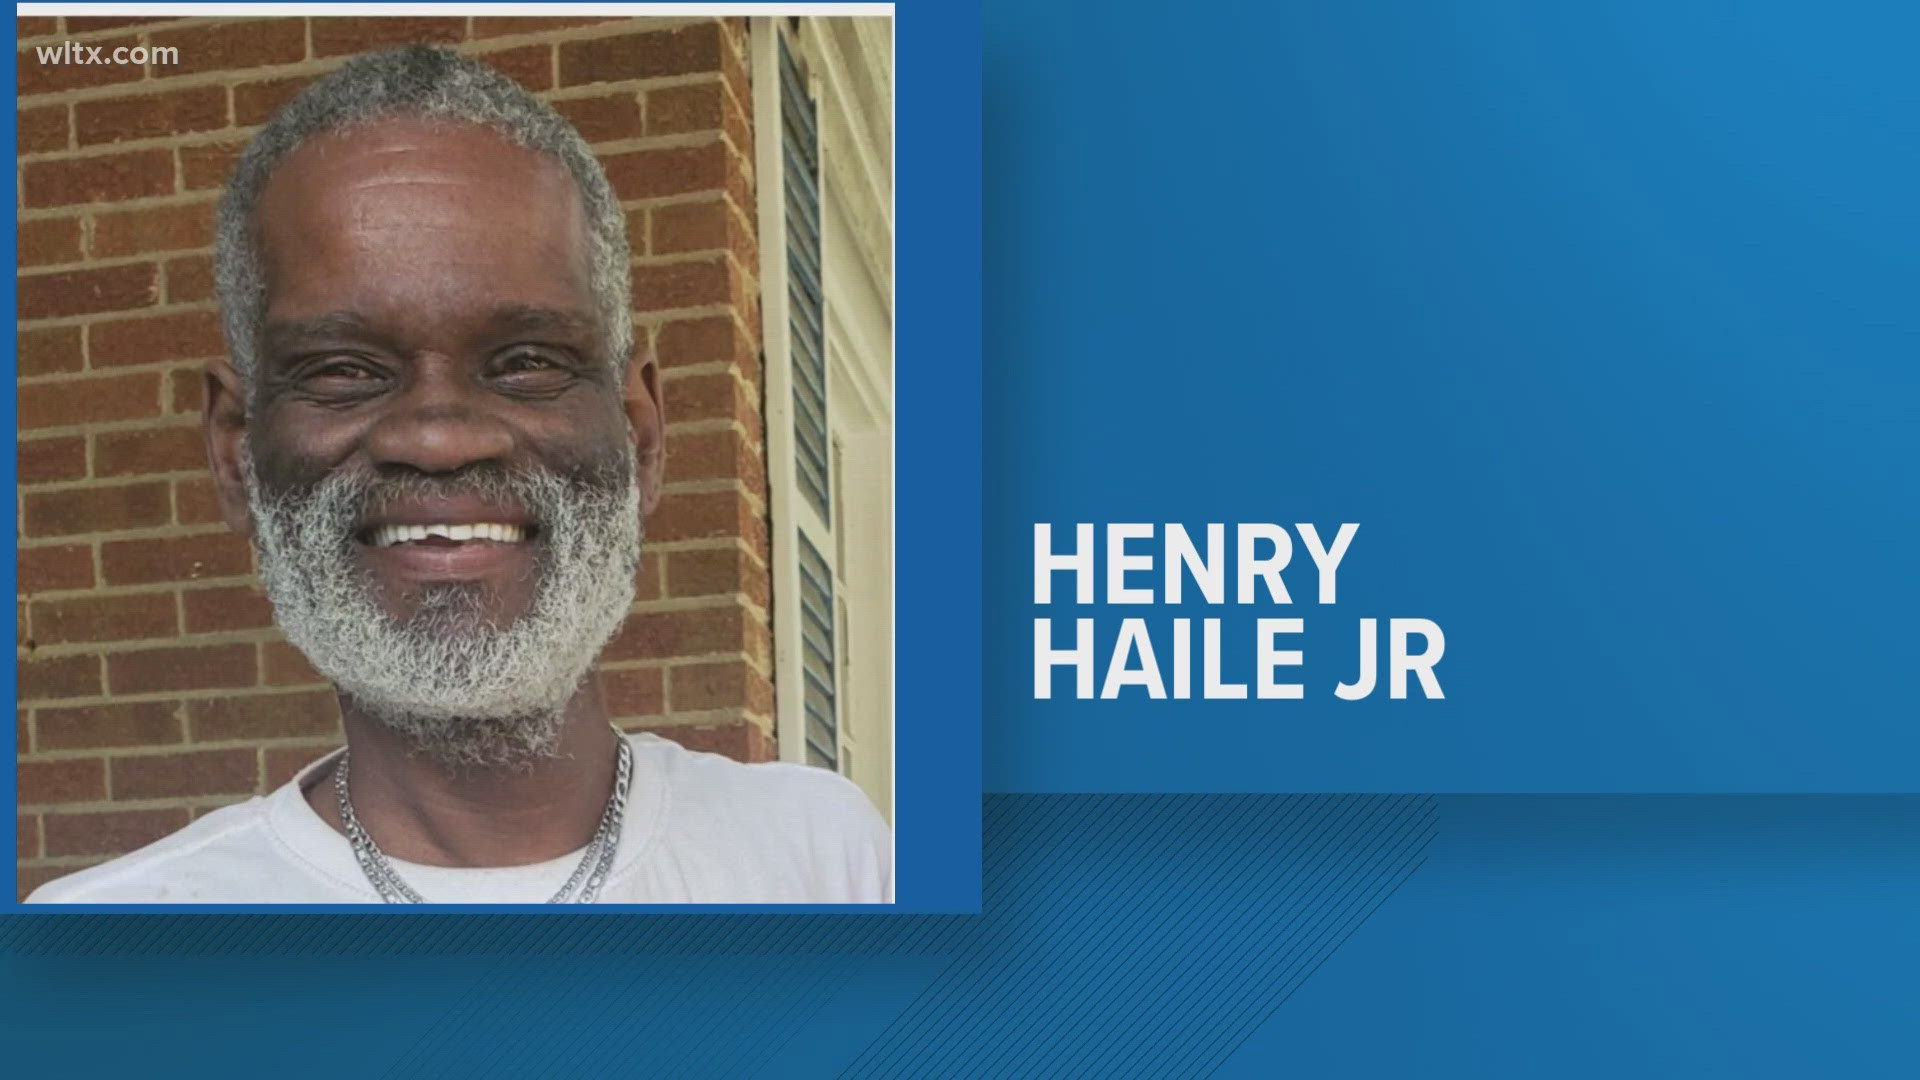 No one has heard from Henry Haile Junior since January.  He was last seen on Stanford street in a burned home.